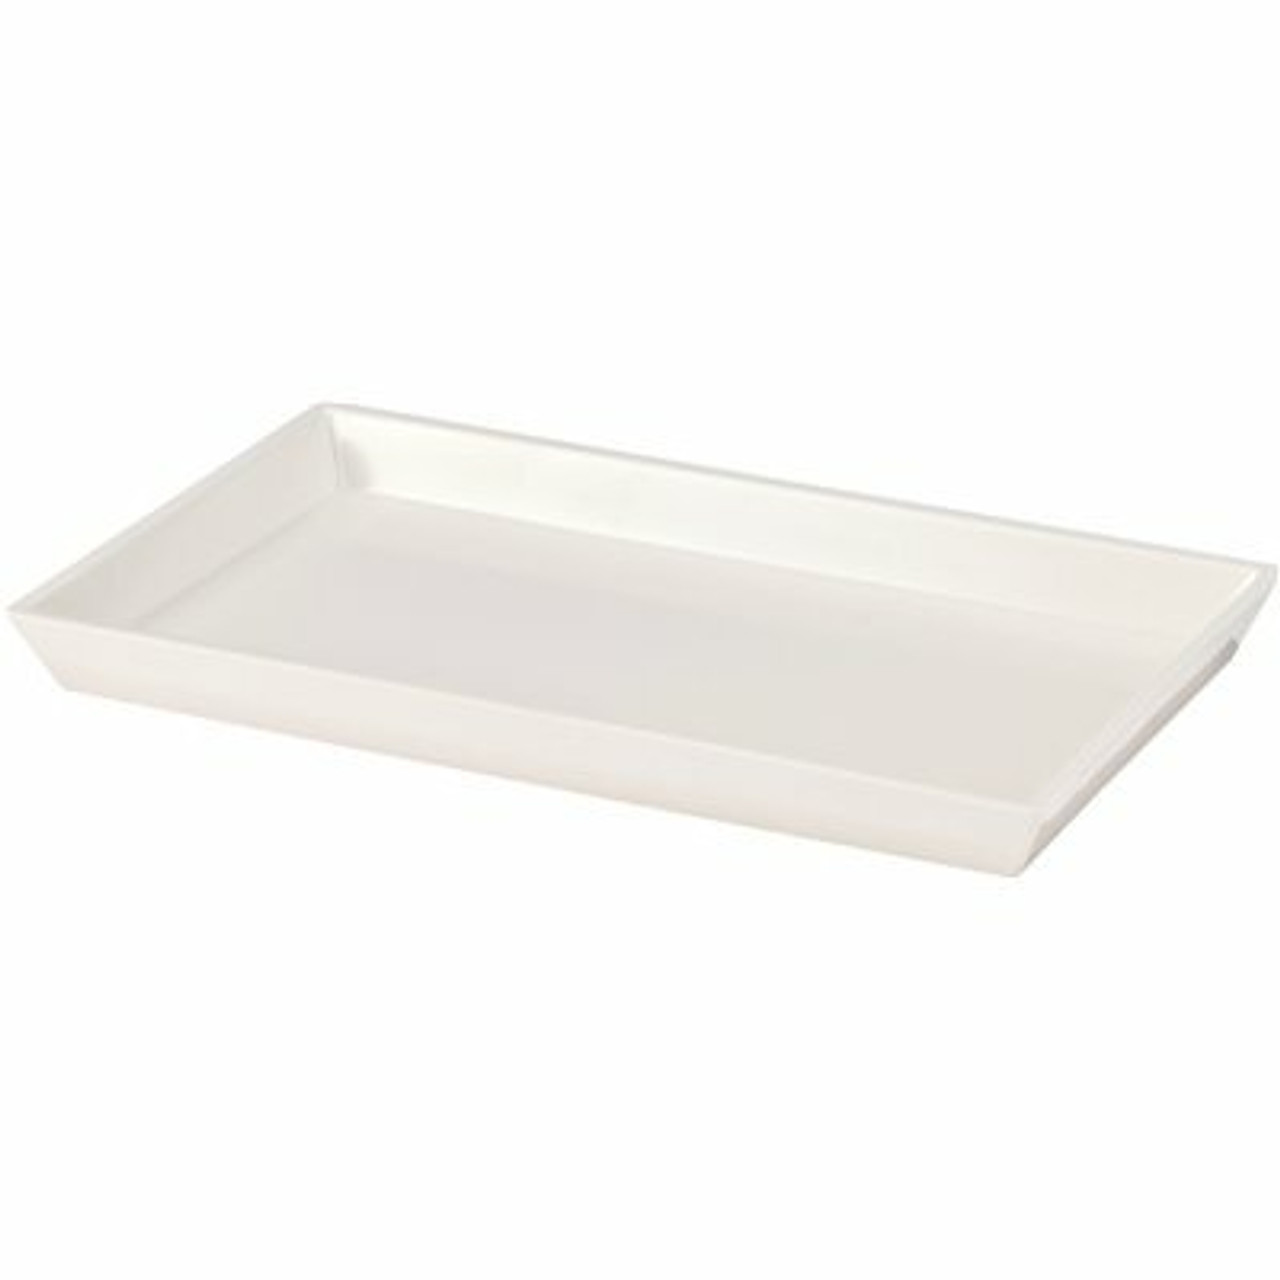 Focus Spa White Collection Amenity Tray Melamine (Case Of 3)